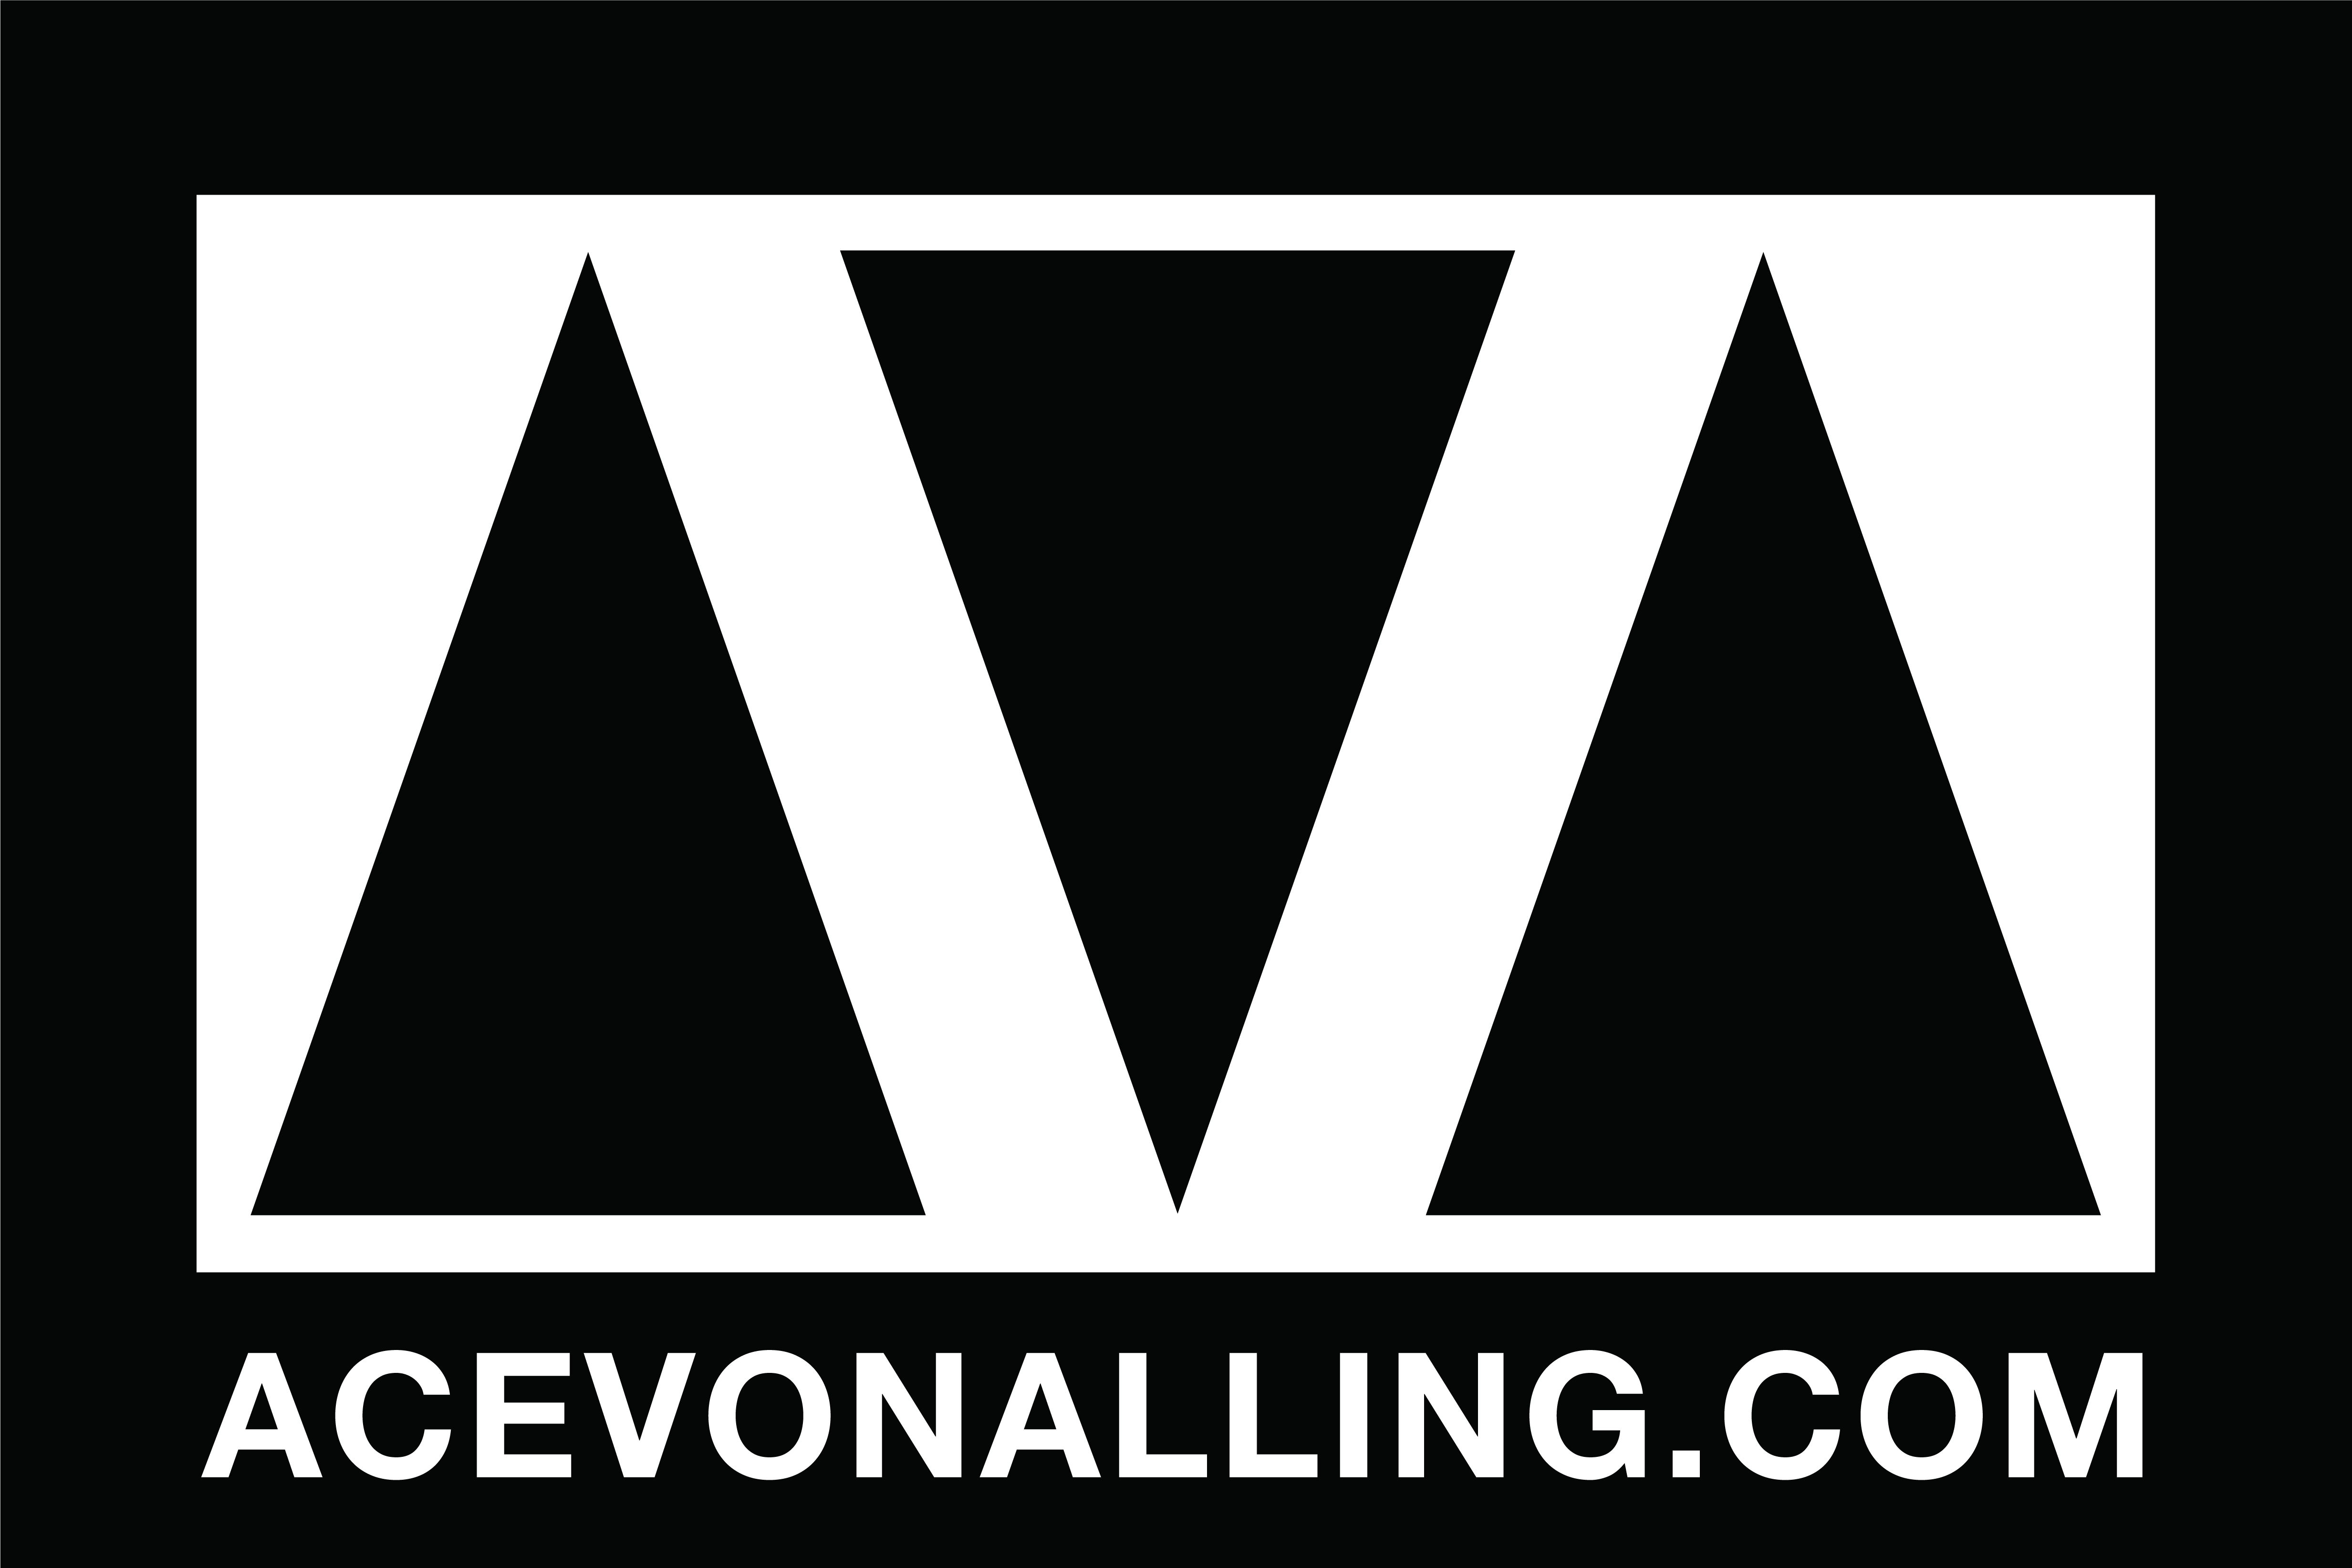 Ace von Alling Logo, three isosceles triangles arranged to mimic the shape of AVA surrounded by a black border